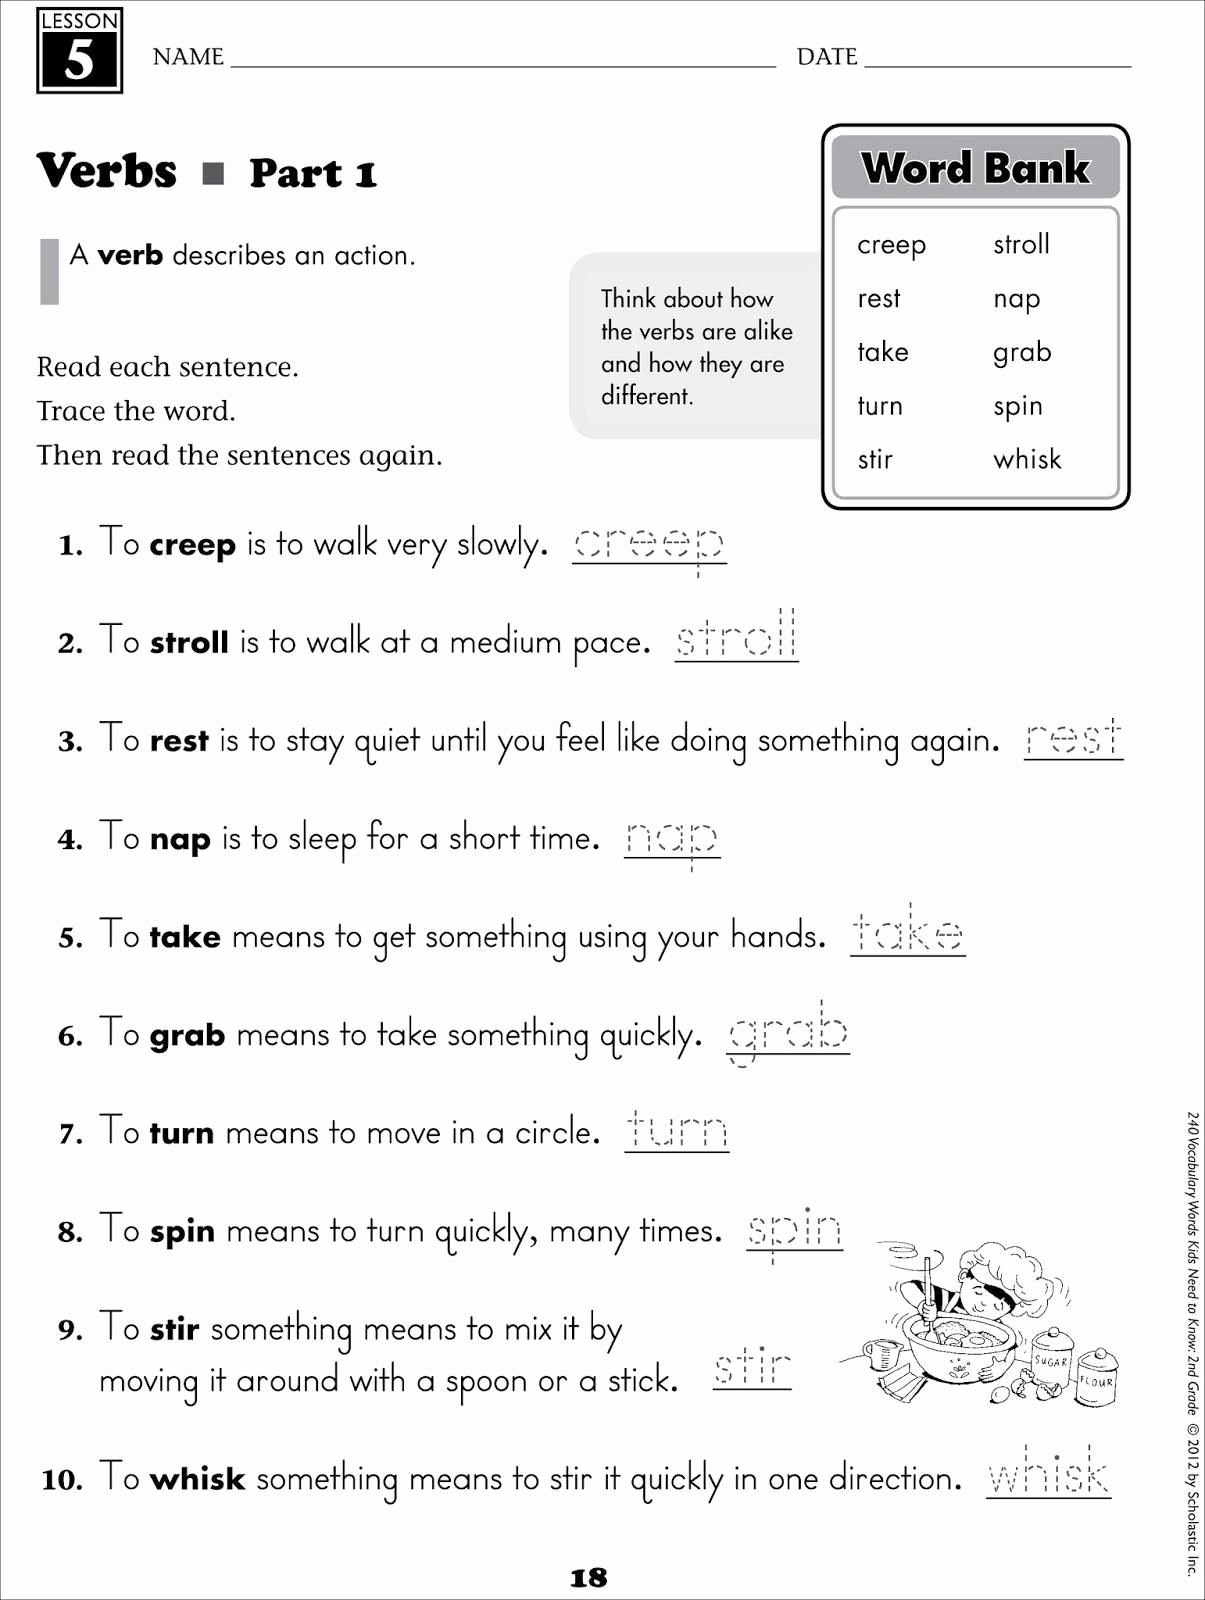 Bunch Ideas Of Action Verbs Worksheet For Grade 1 New Action Verbs Together With Verbs Worksheets For Grade 1